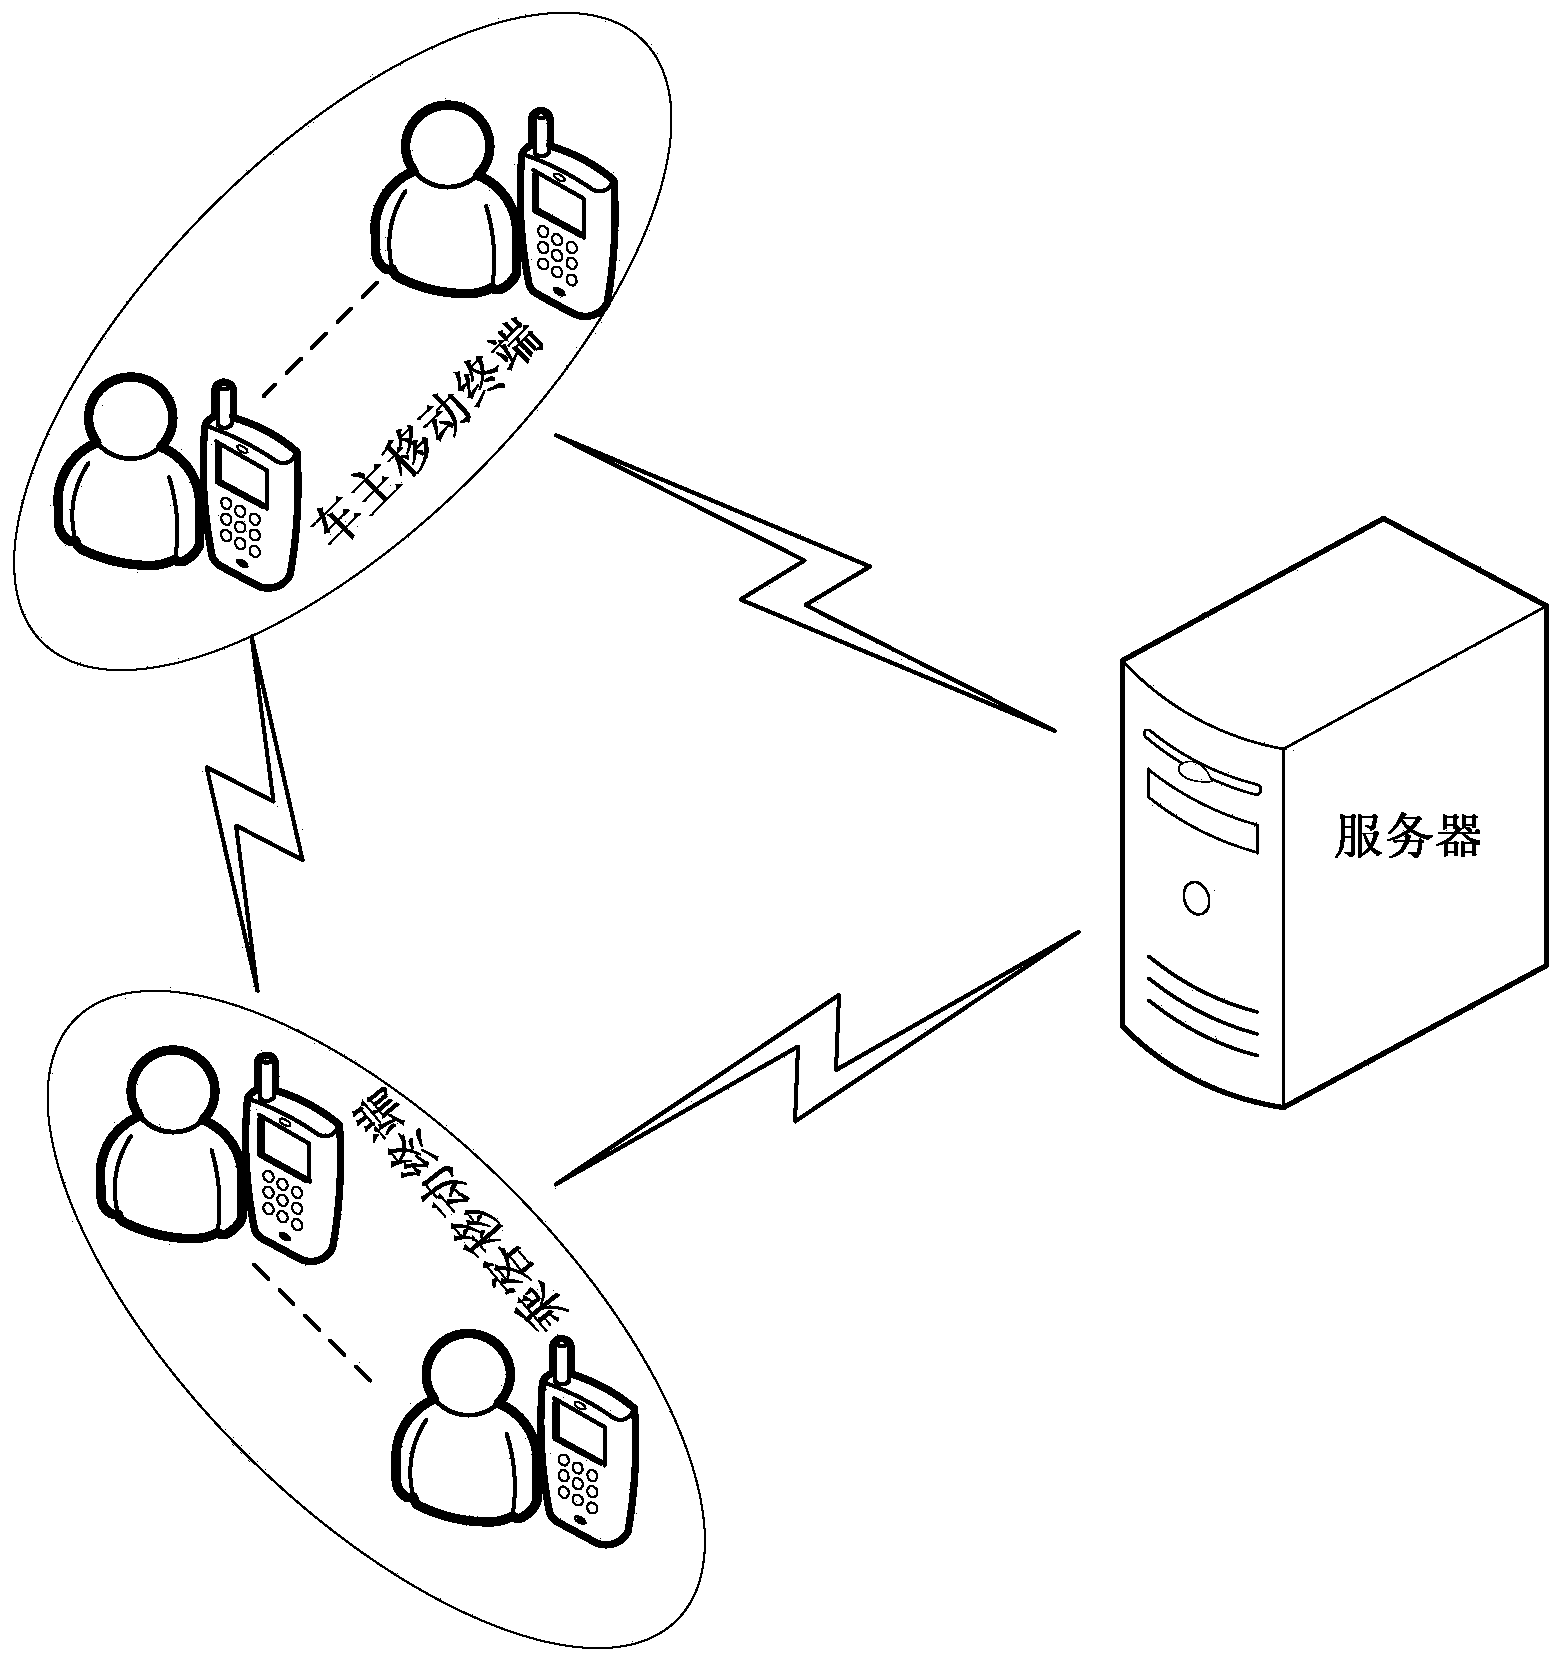 Car-taking method and system based on mobile terminals